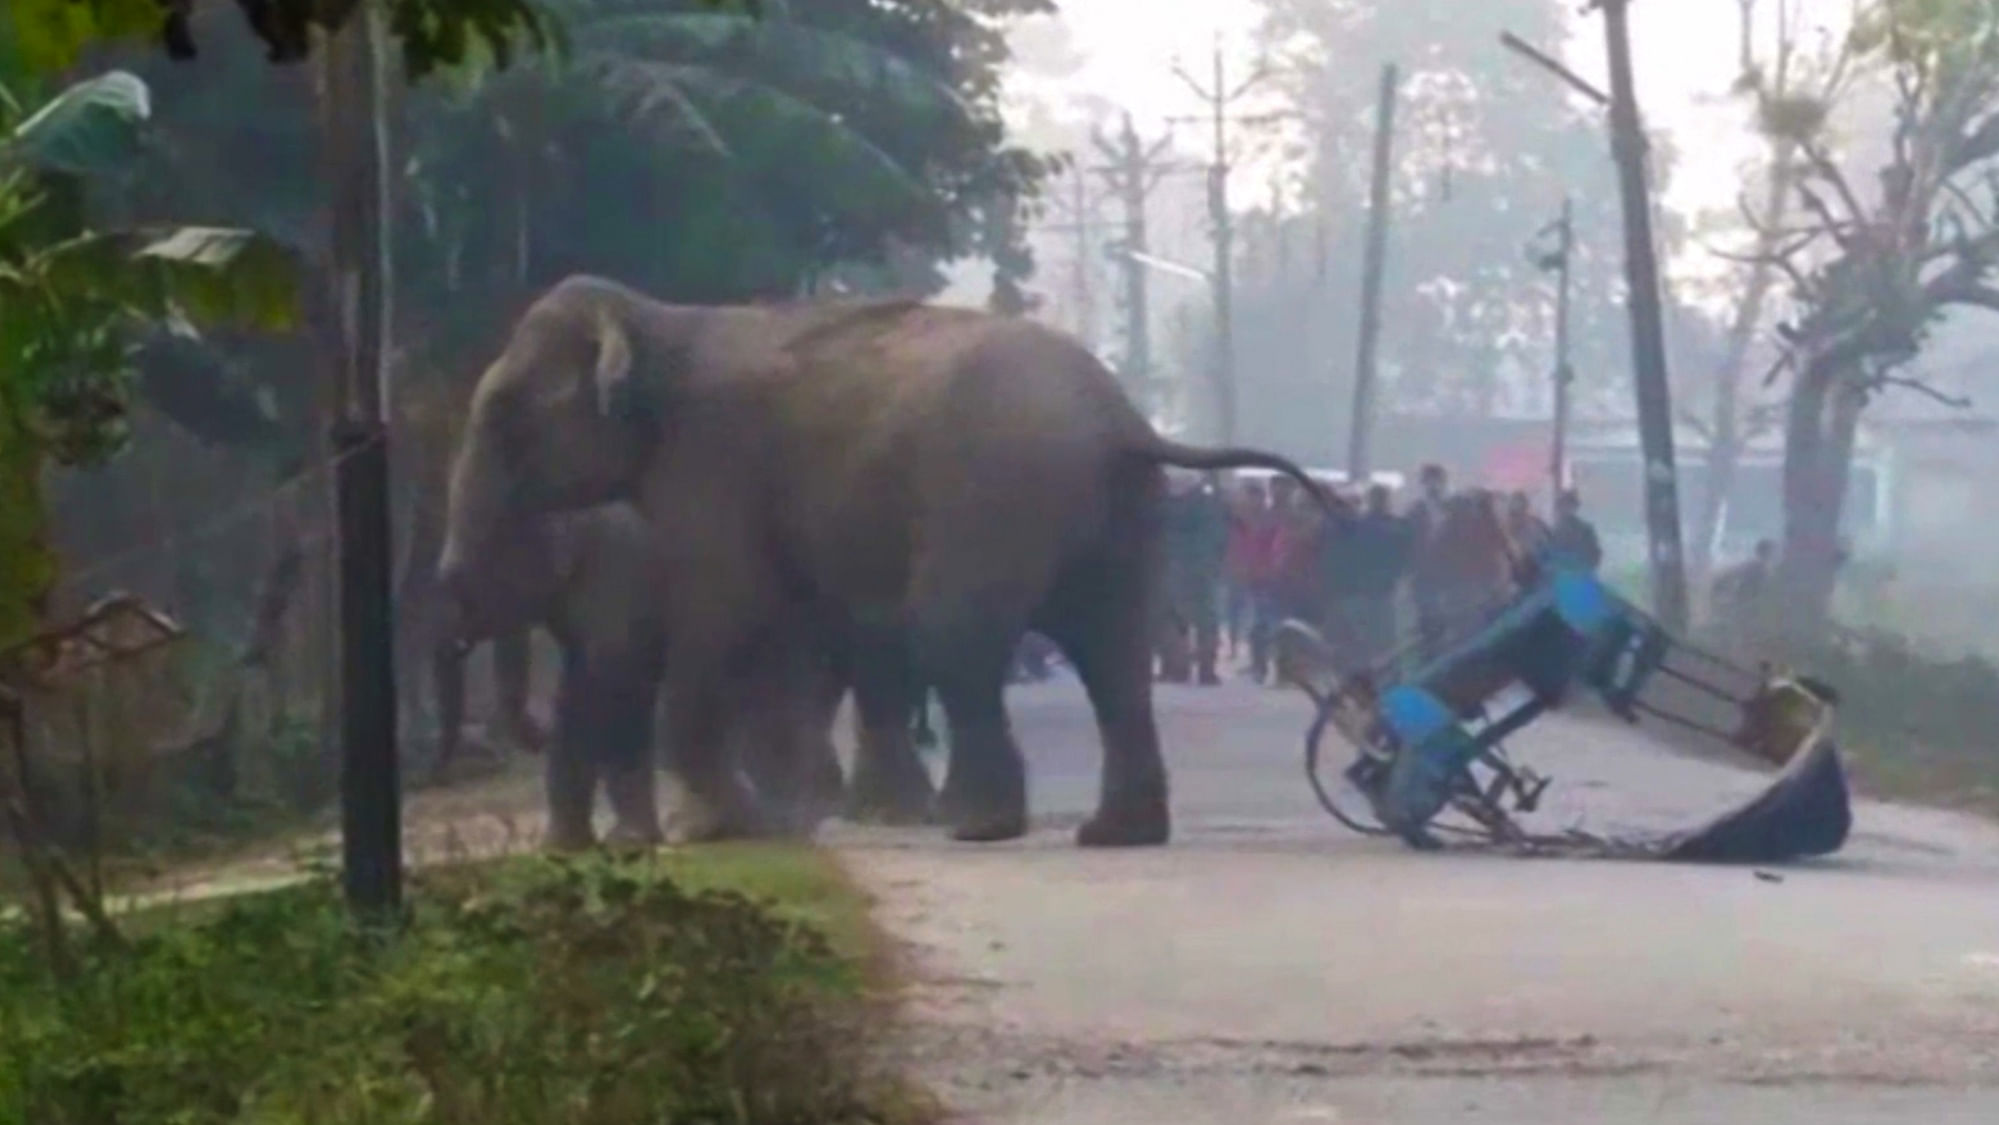 Wild elephants run amok in a West Bengal town, damaging vehicles and injuring people. (Photo: AP/Caters News screengrab)